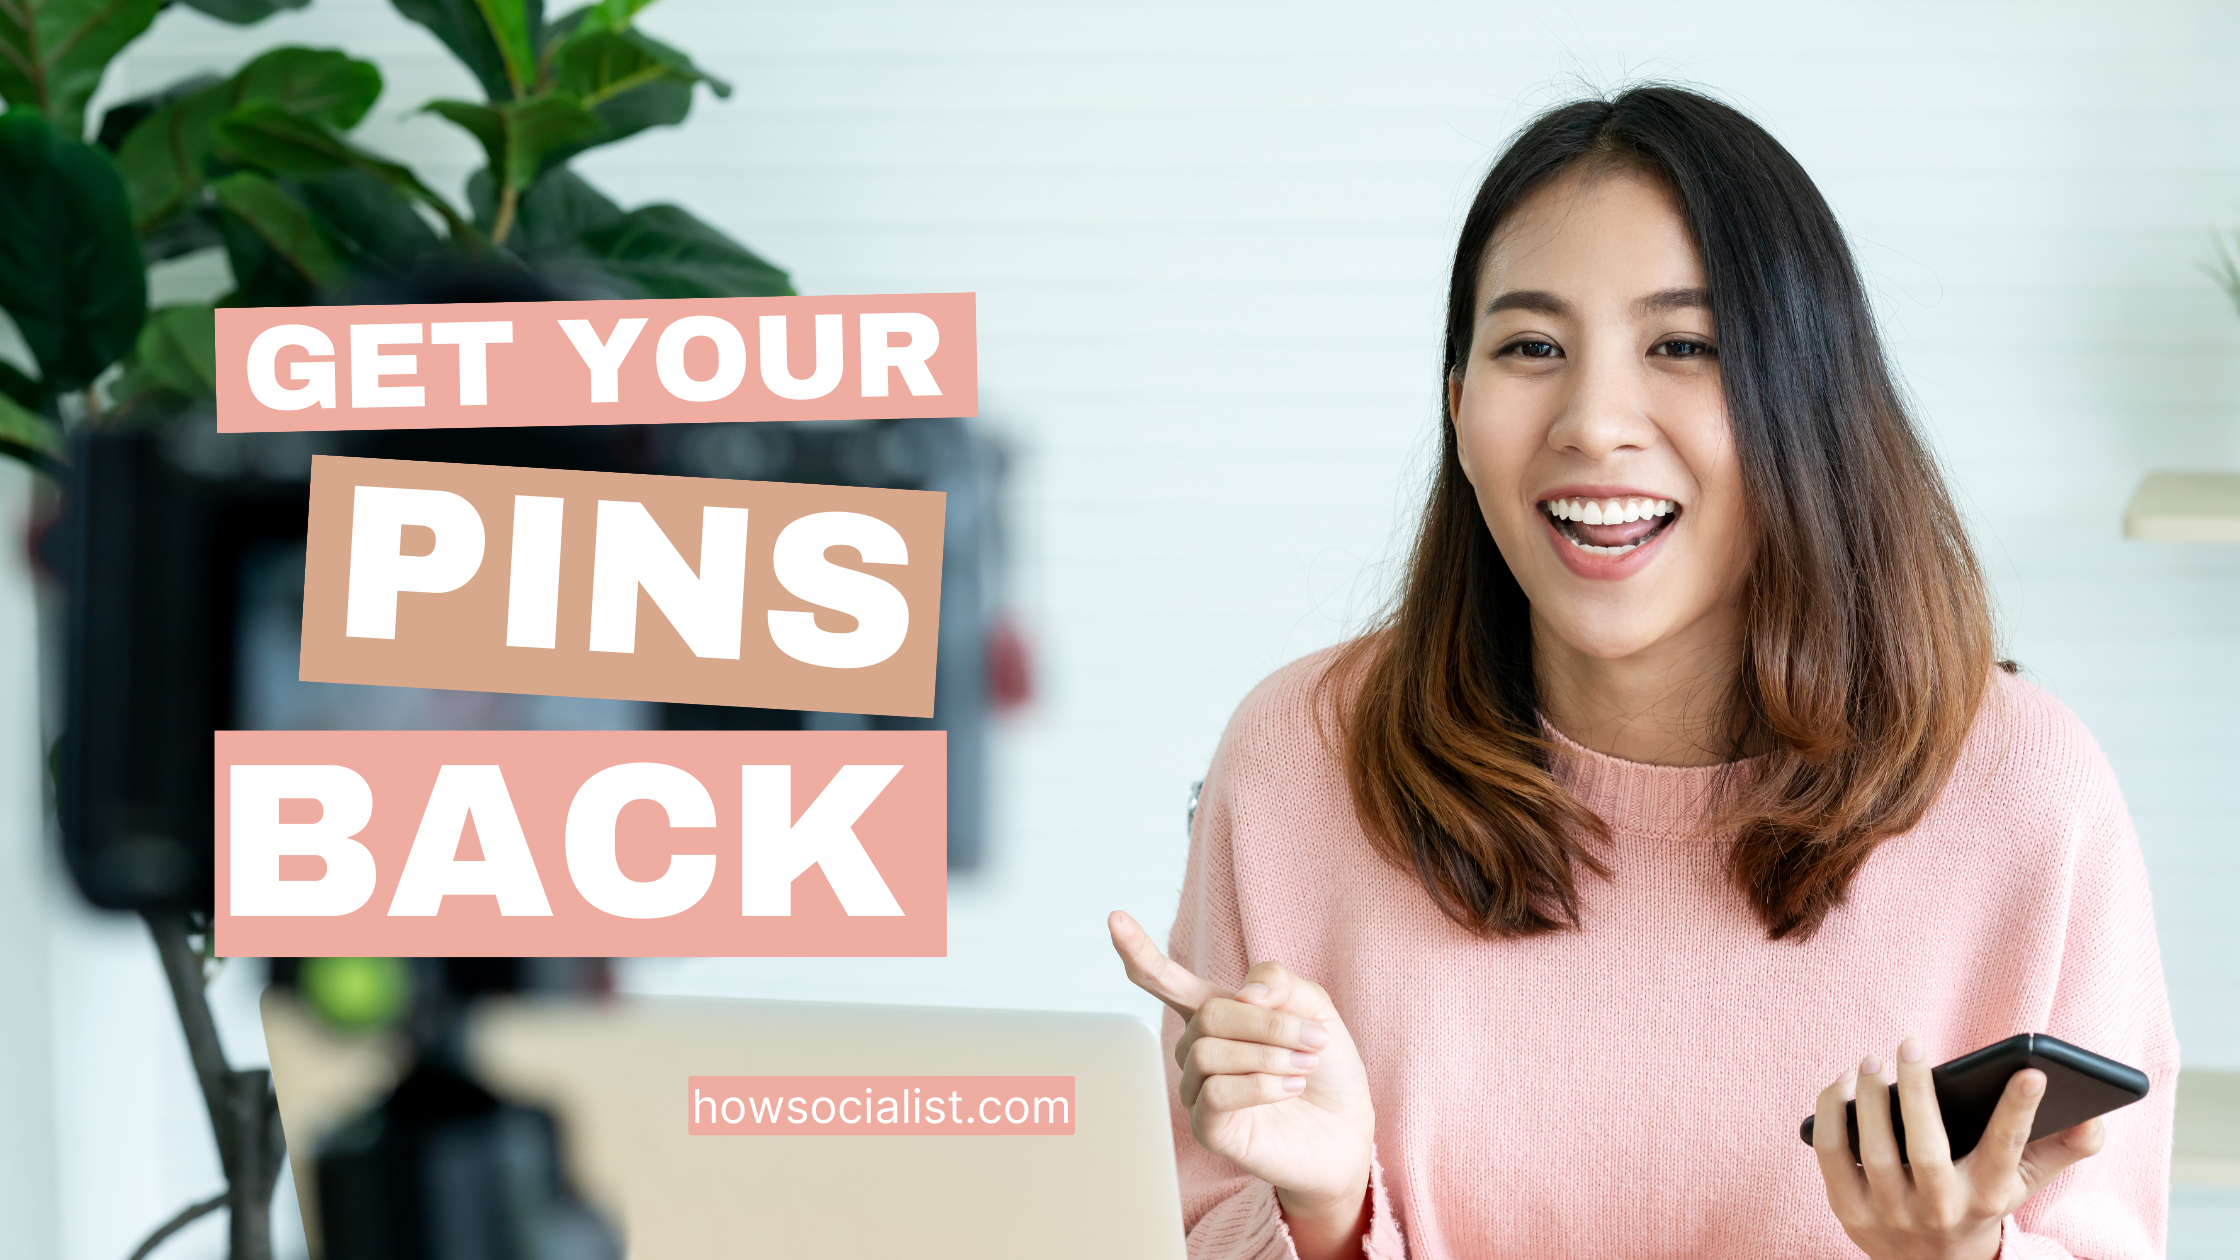 Get Your Pins Back A Guide to Recovering Deleted Pinterest Content